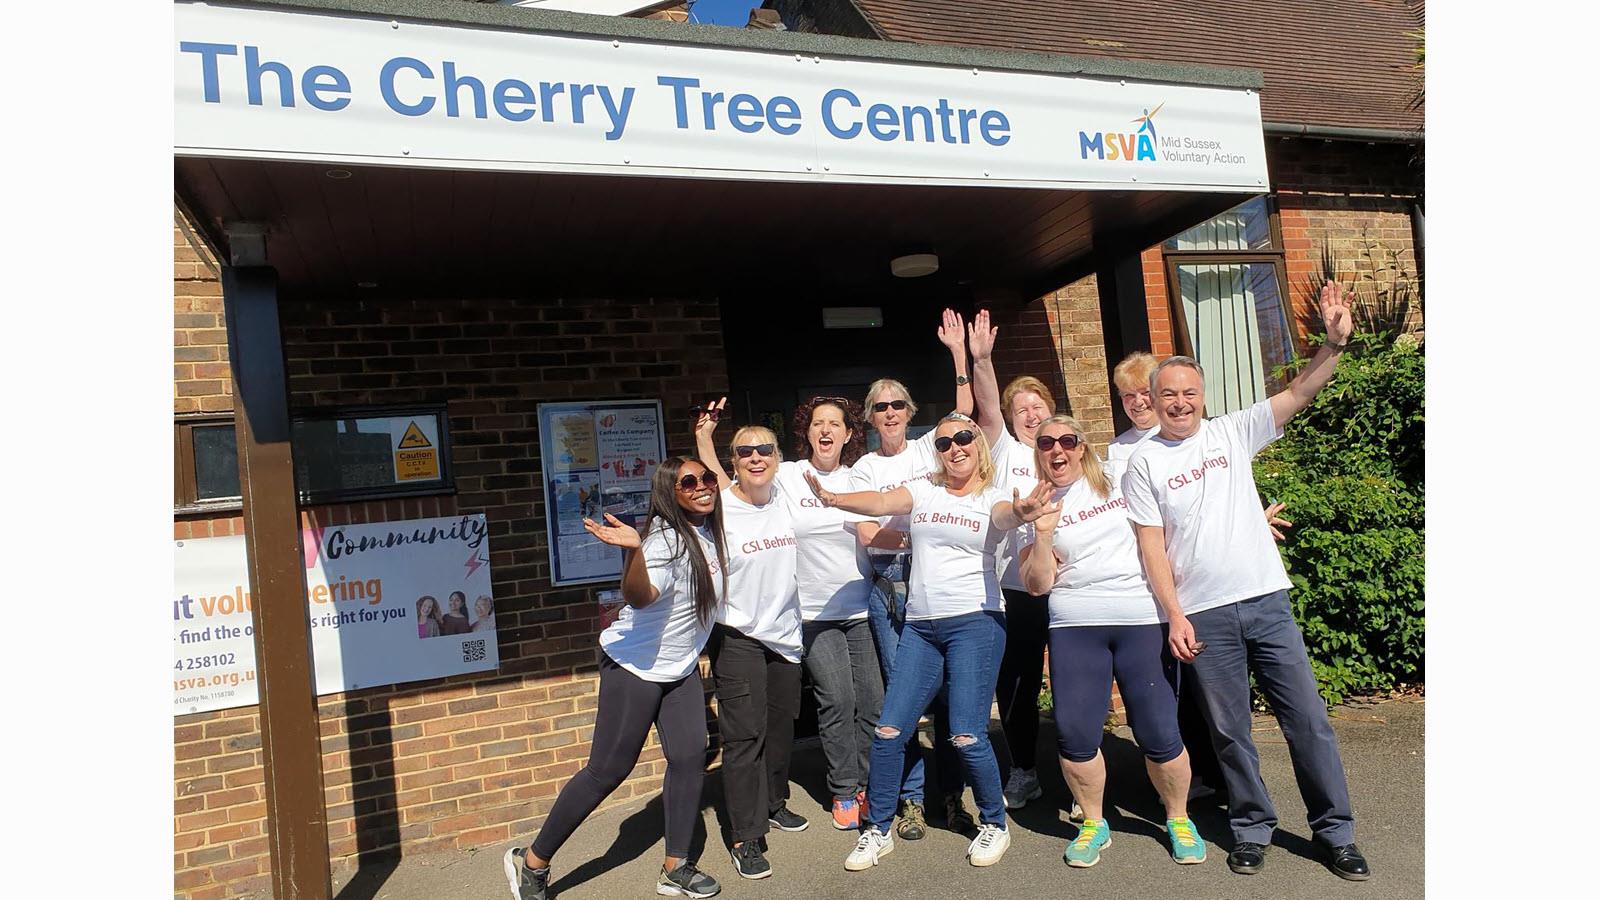 A group of CSL Behring employees outside the Cherry Tree Centre, where they volunteered